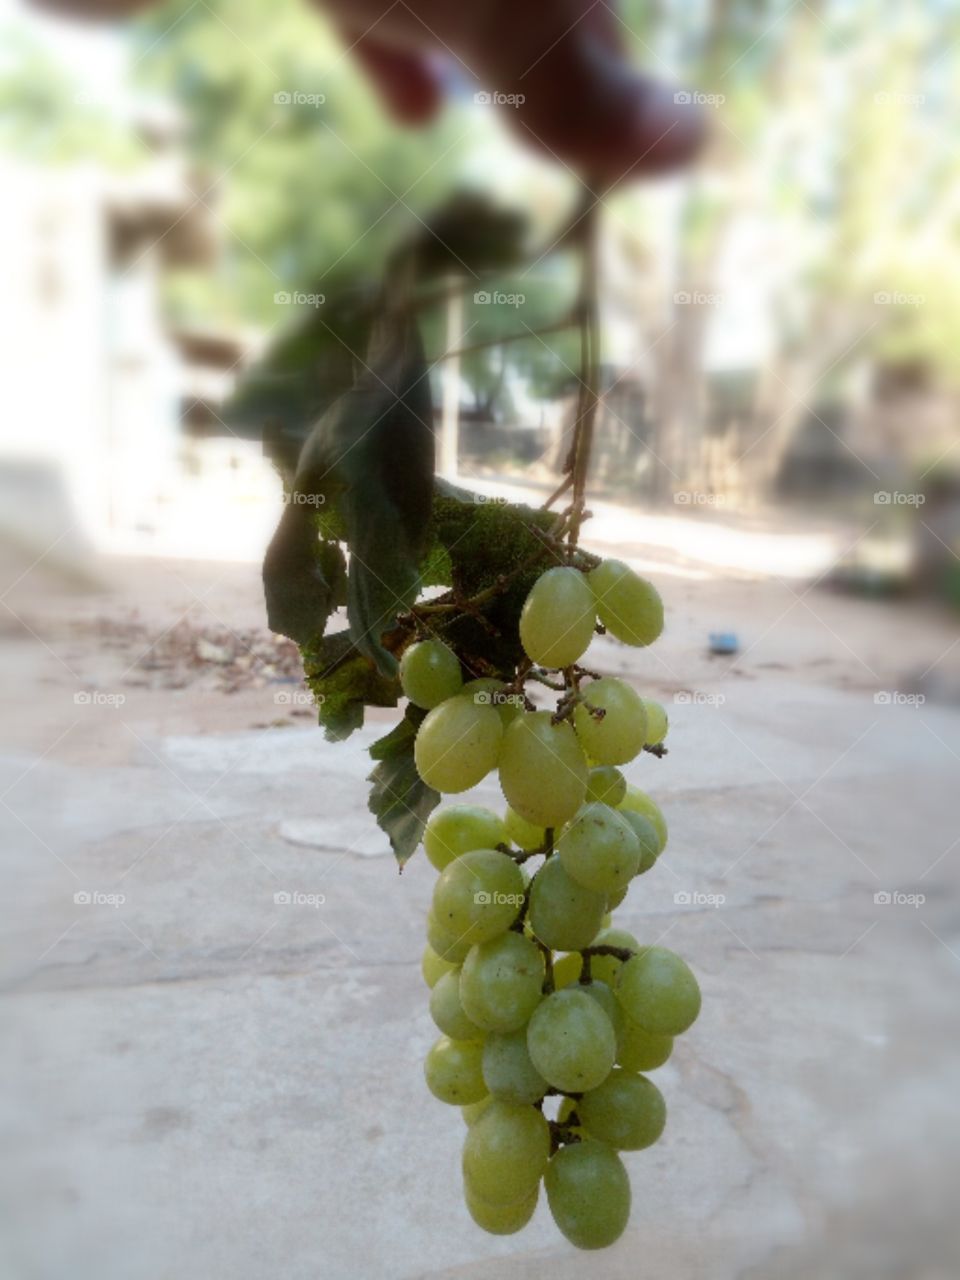 Green Grapes Photo blur background it is a nice photo.